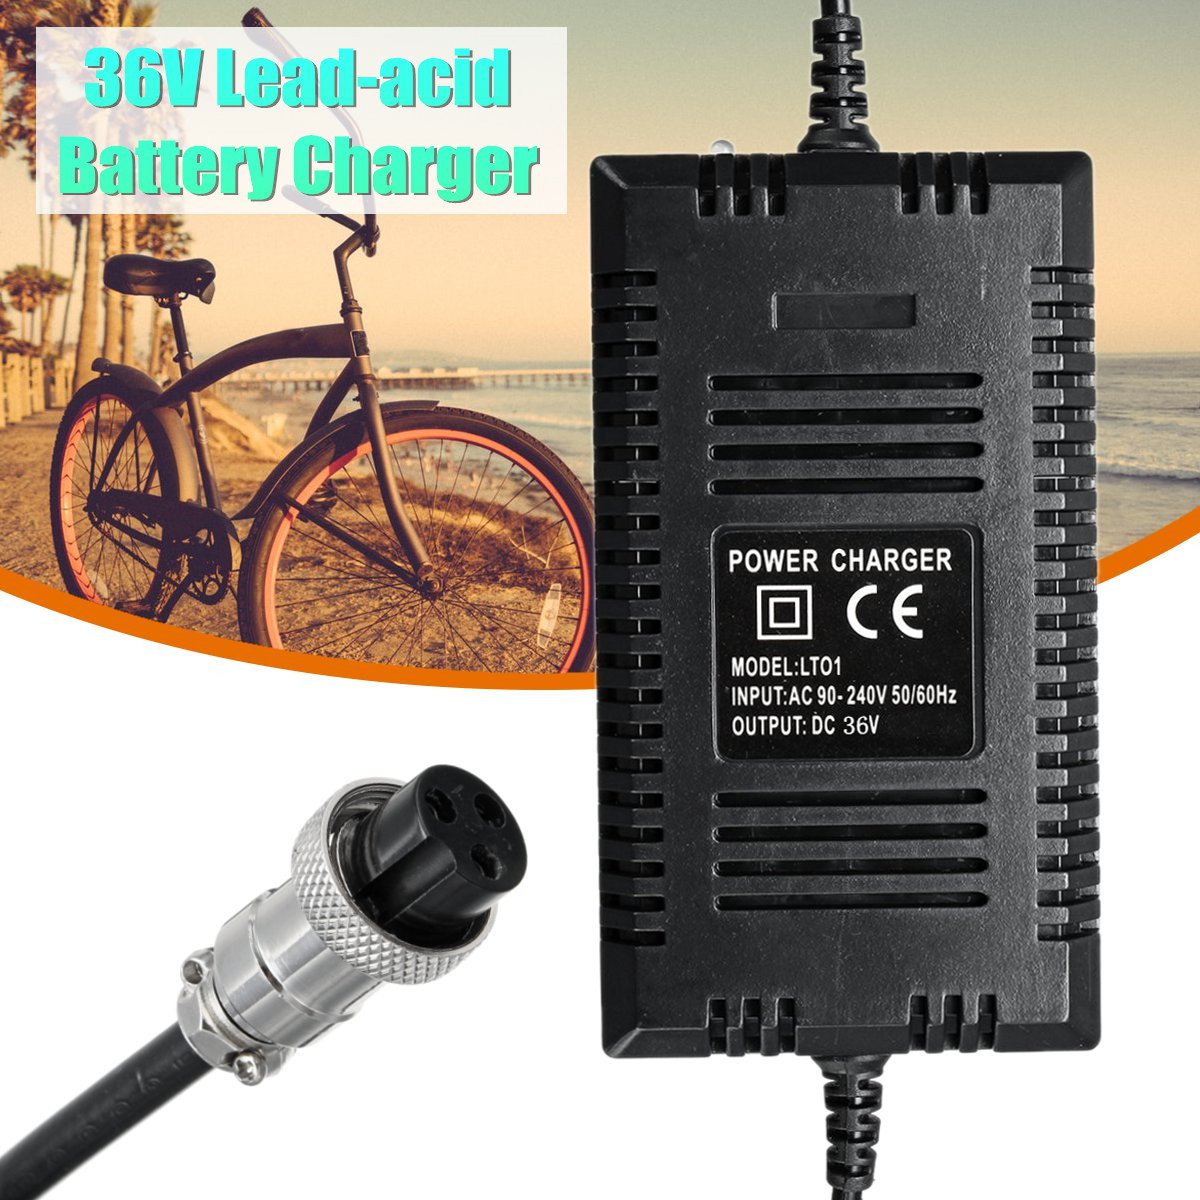 36V-18A-Lead-acid-Battery-Charger-Electric-Car-Vehicle-Scooter-Bicycle-Charger-1375553-2